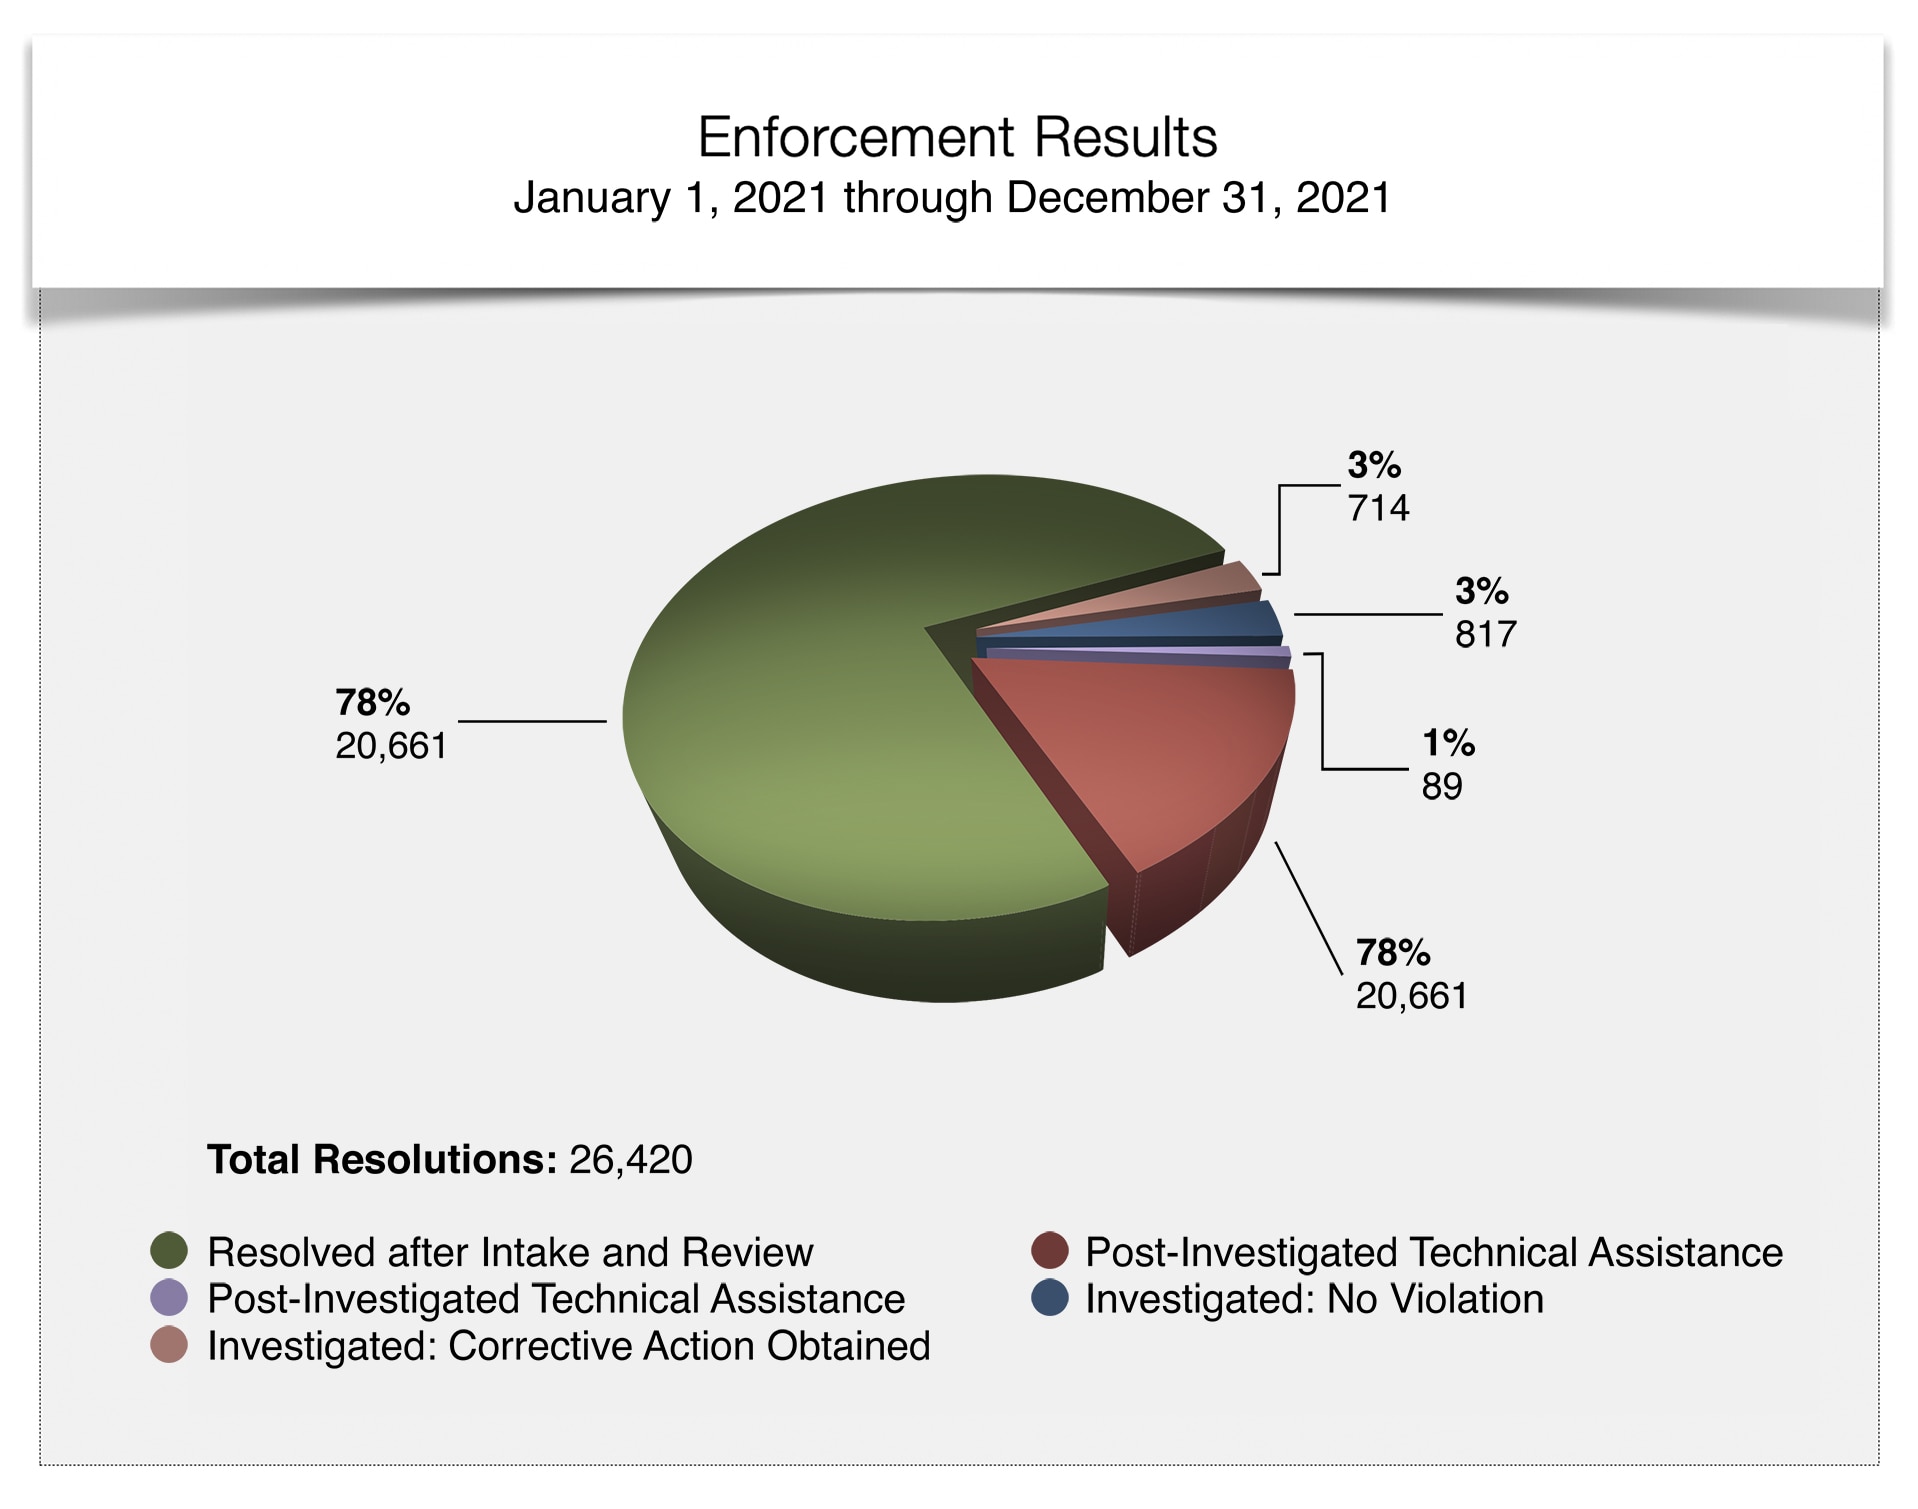 Enforcement Results - Total Resolution - January 1, 2021 through December 31, 2021